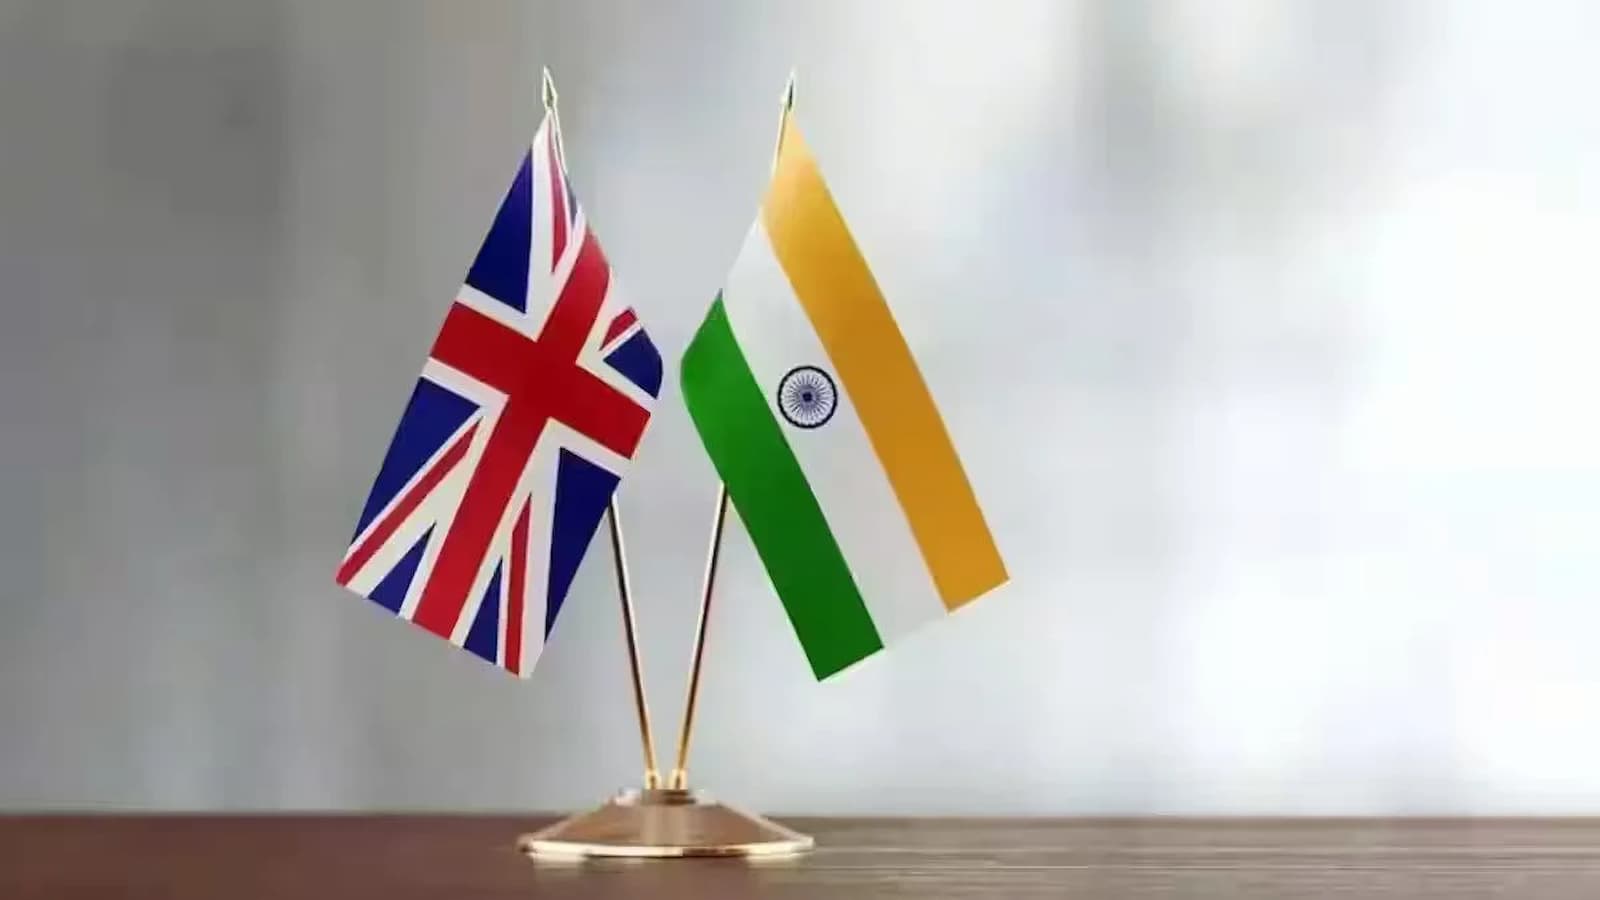 India and UK Foreign Office Consultation, India and UK, India and UK trade agreement, 6th cyber dialogue